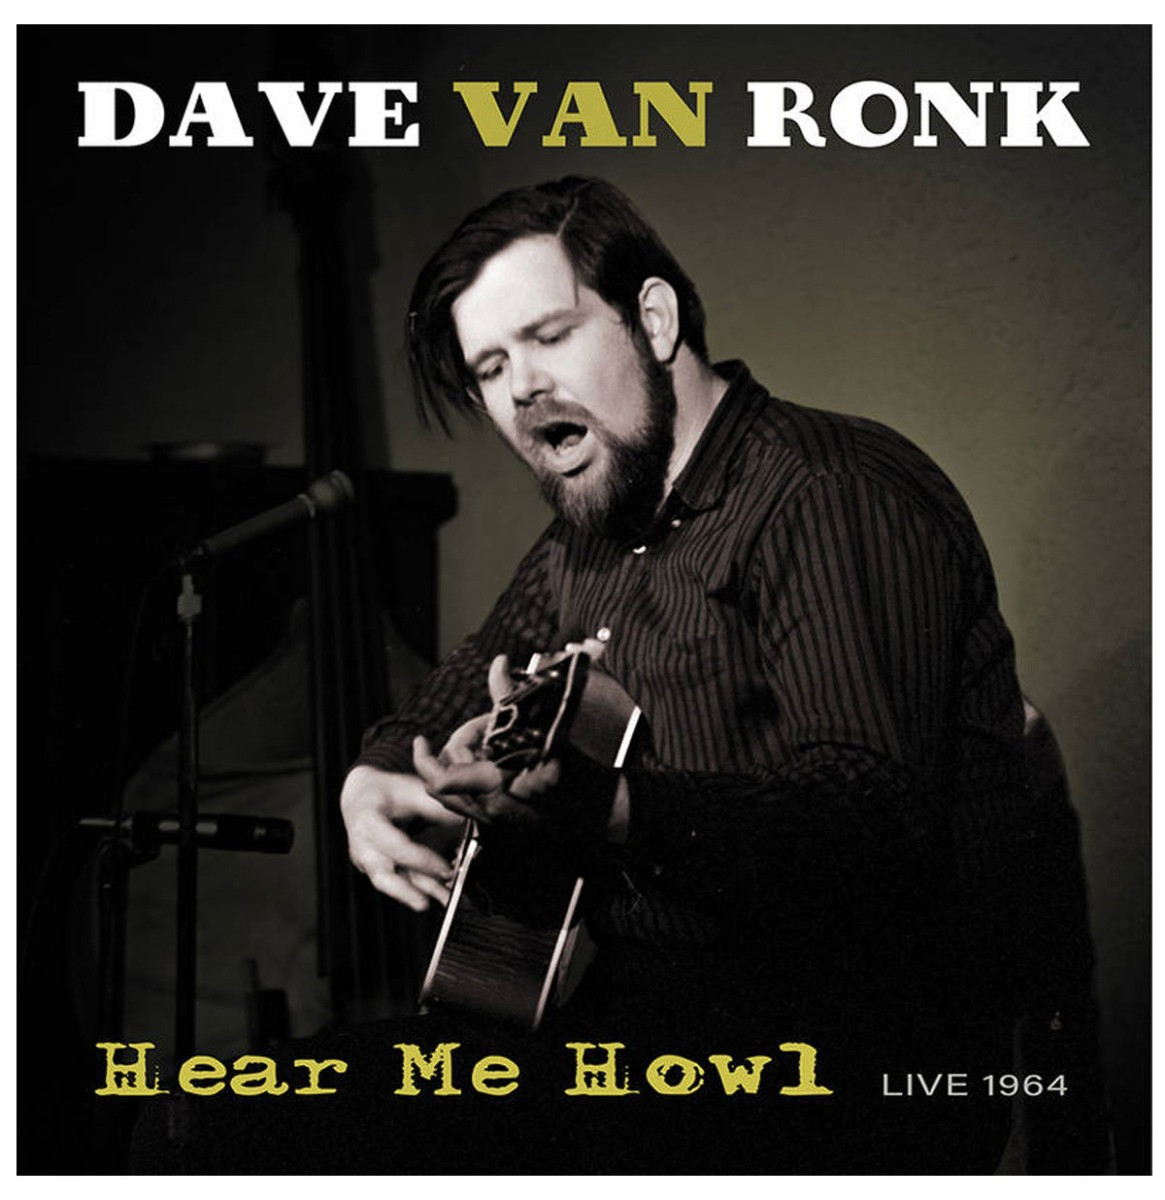 Dave Van Ronk - Hear Me Howl --Live 1964 LP (Record Store Day Black Friday)